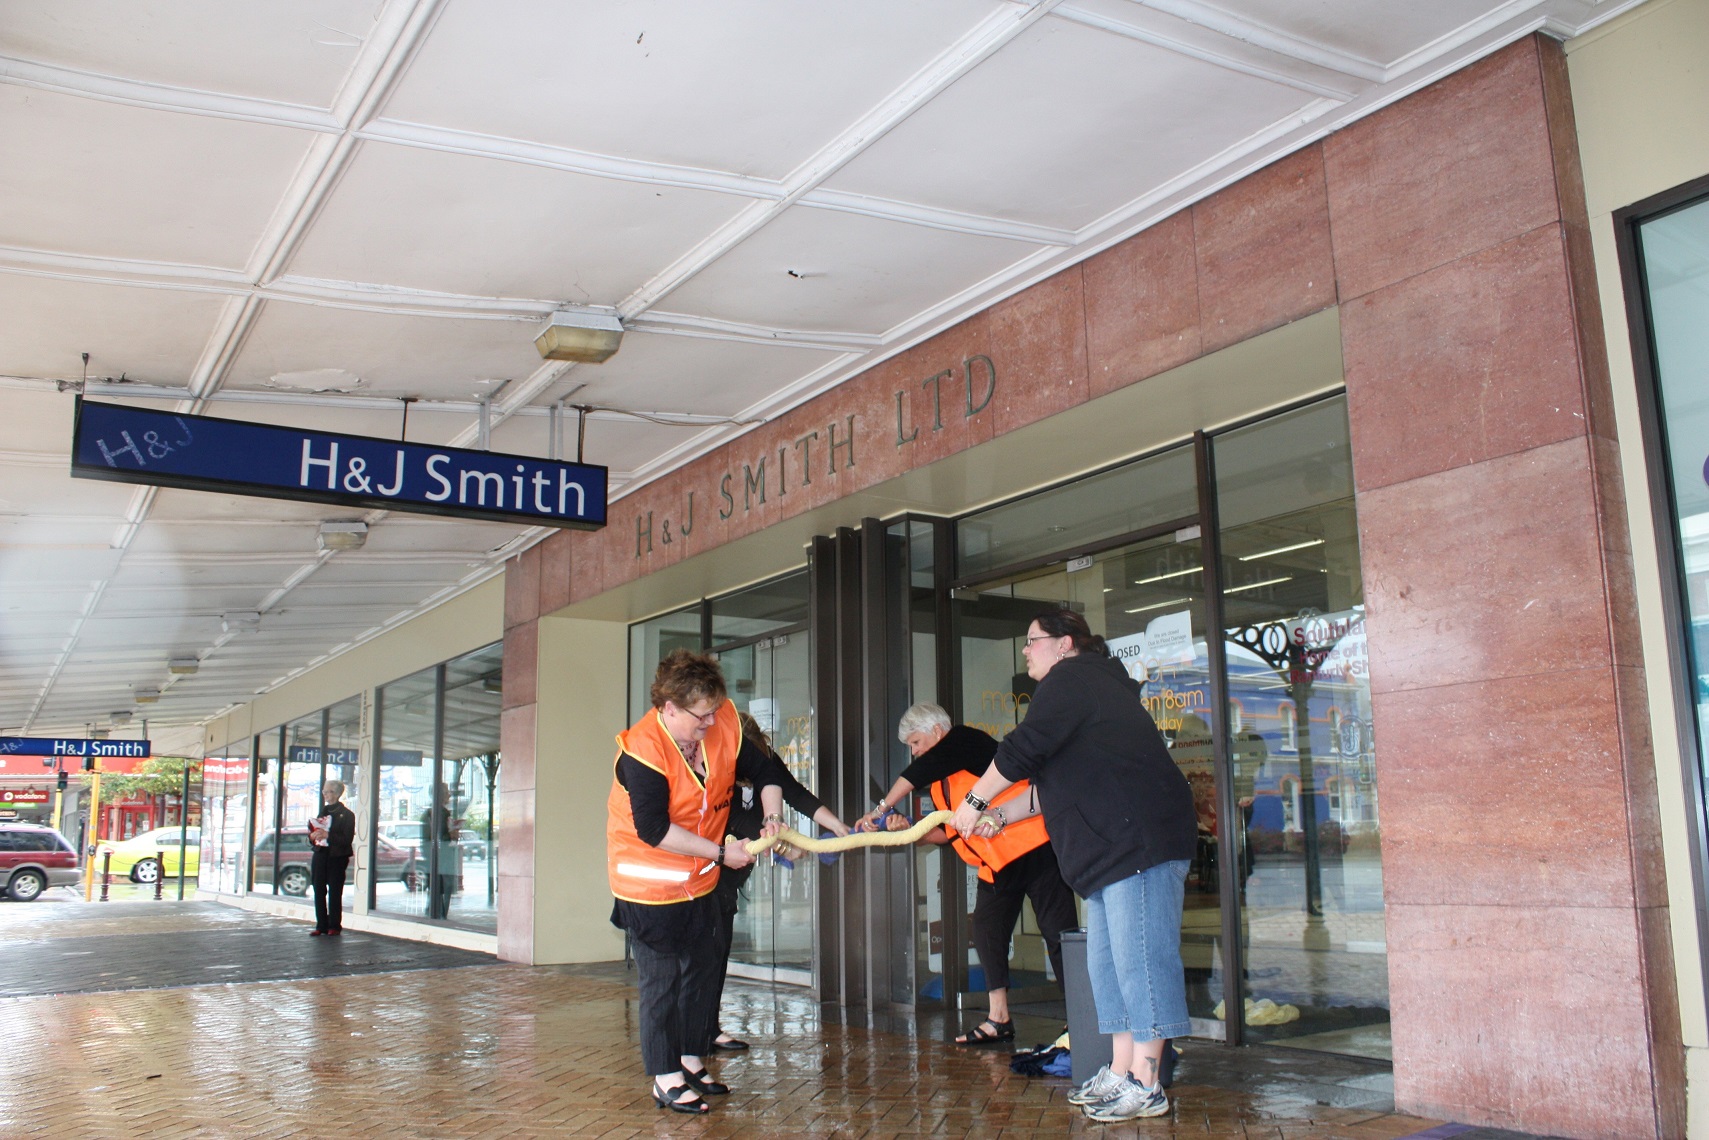 Staff work together to clear water from the store after a hailstorm in 2010. Photo: Selwyn Guyton